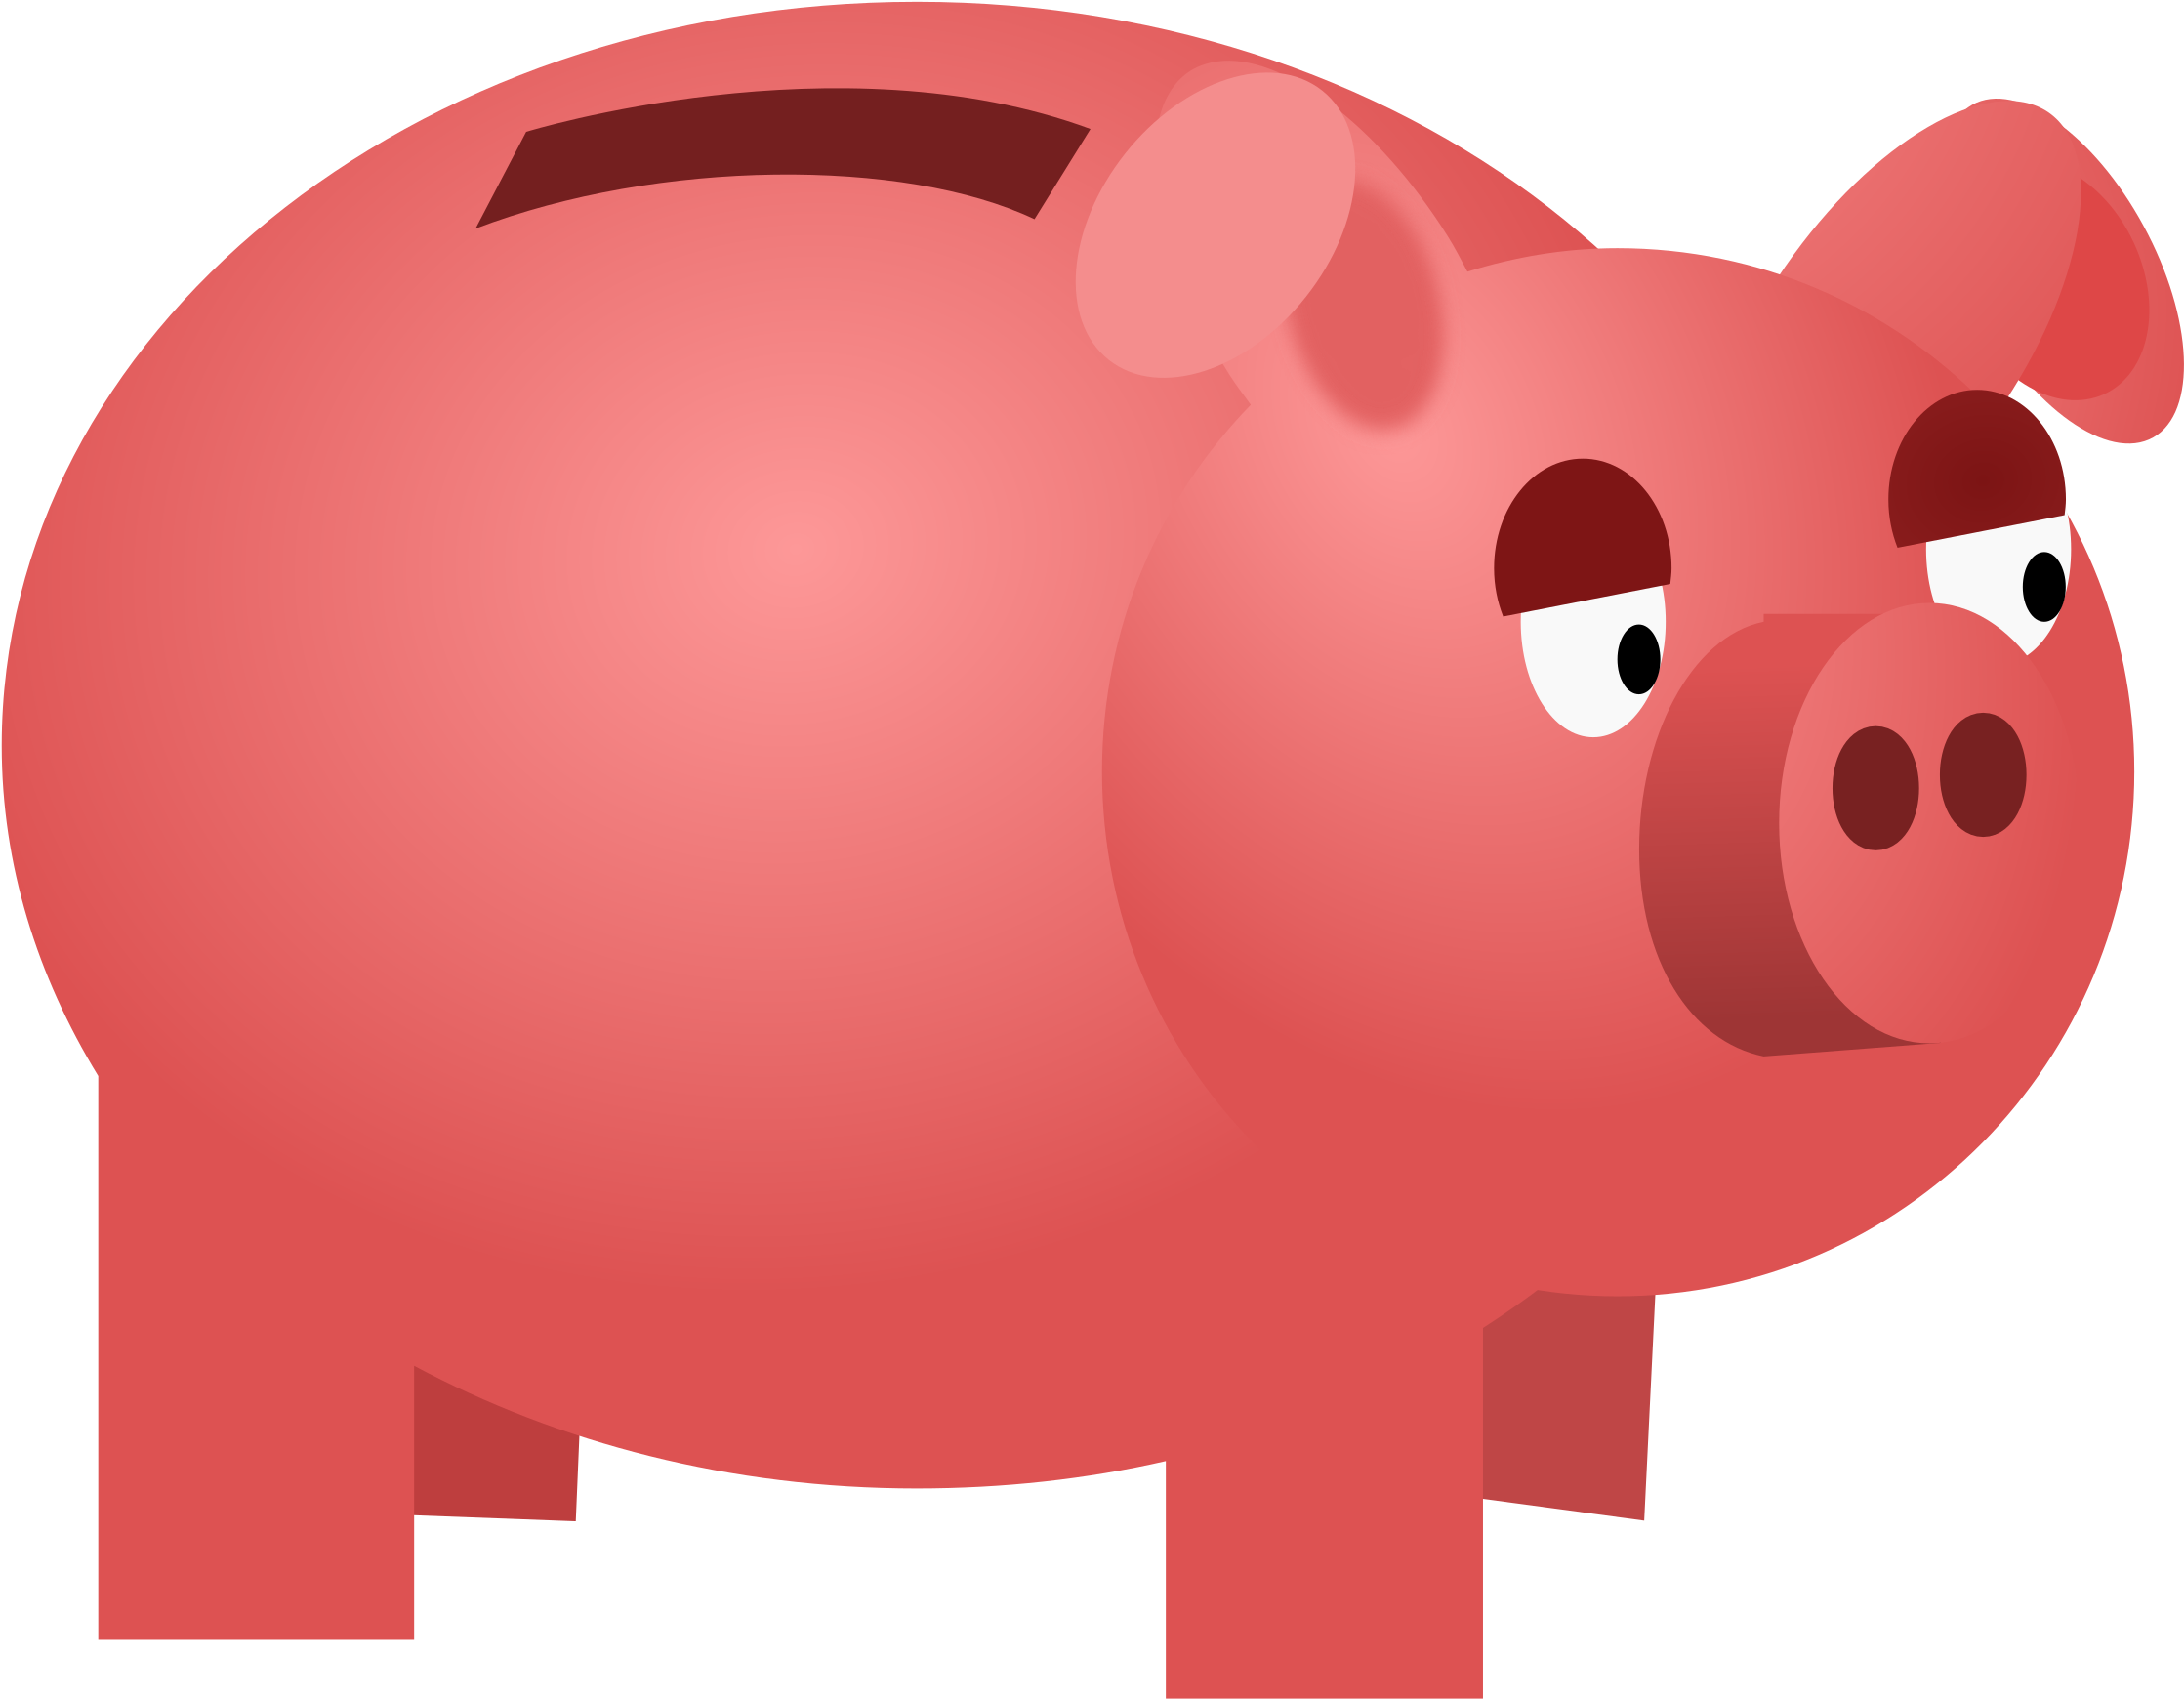 Download Png Image Report - Piggy Bank Clipart Free (2400x2400)